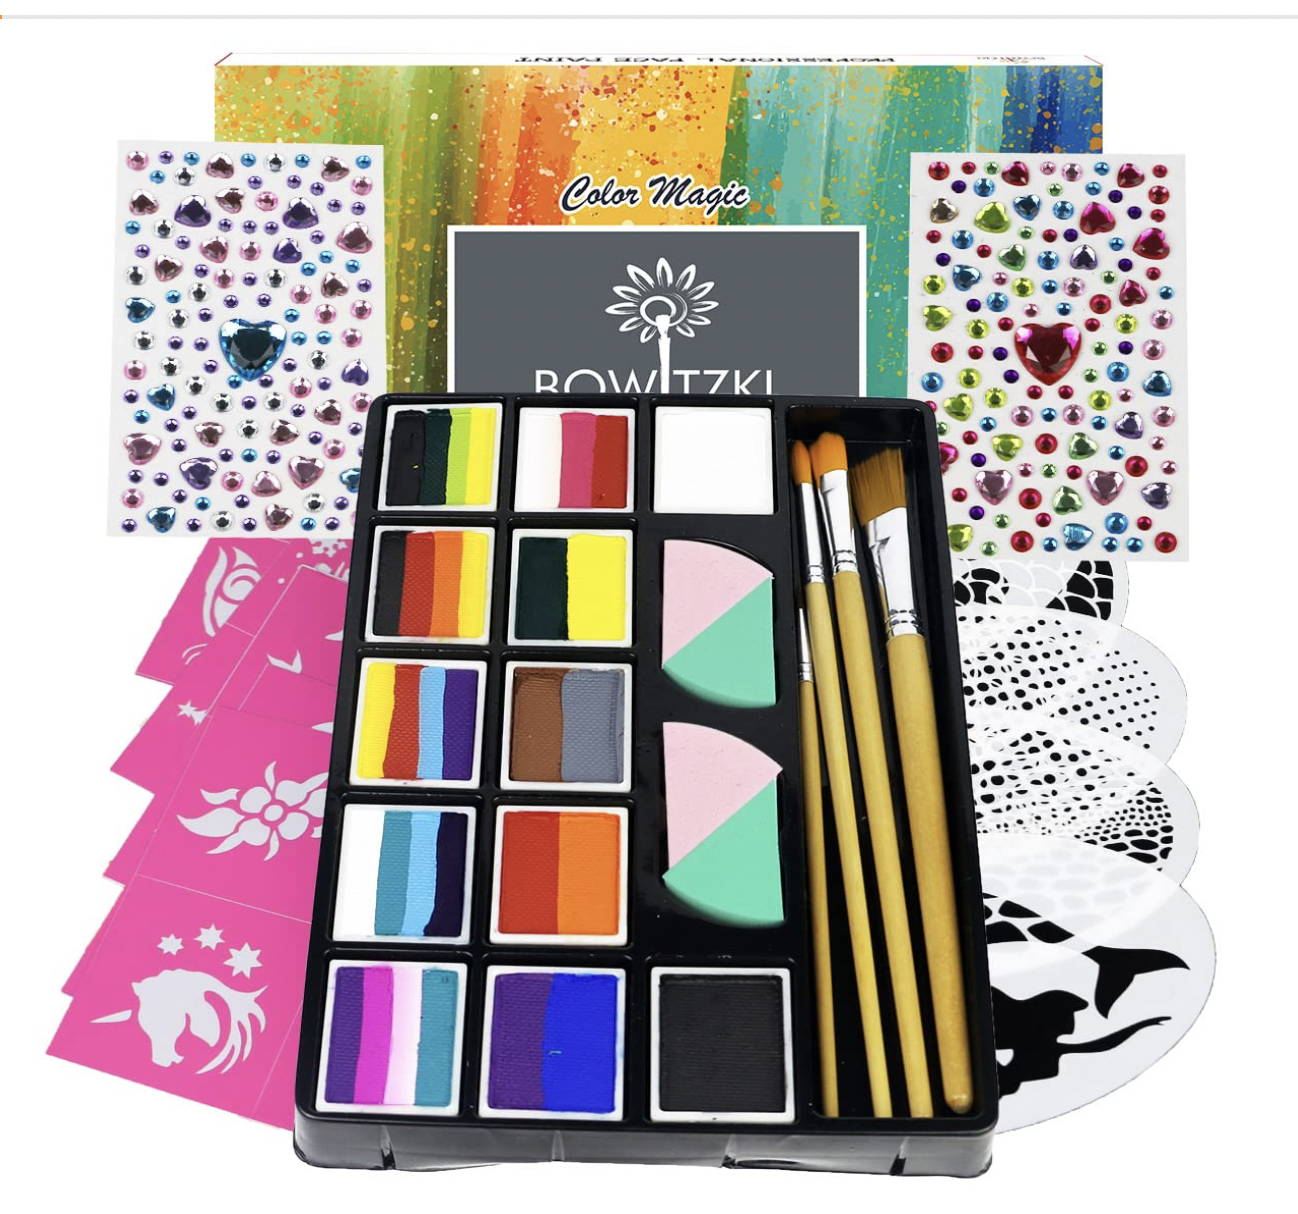 Face Painting Kit